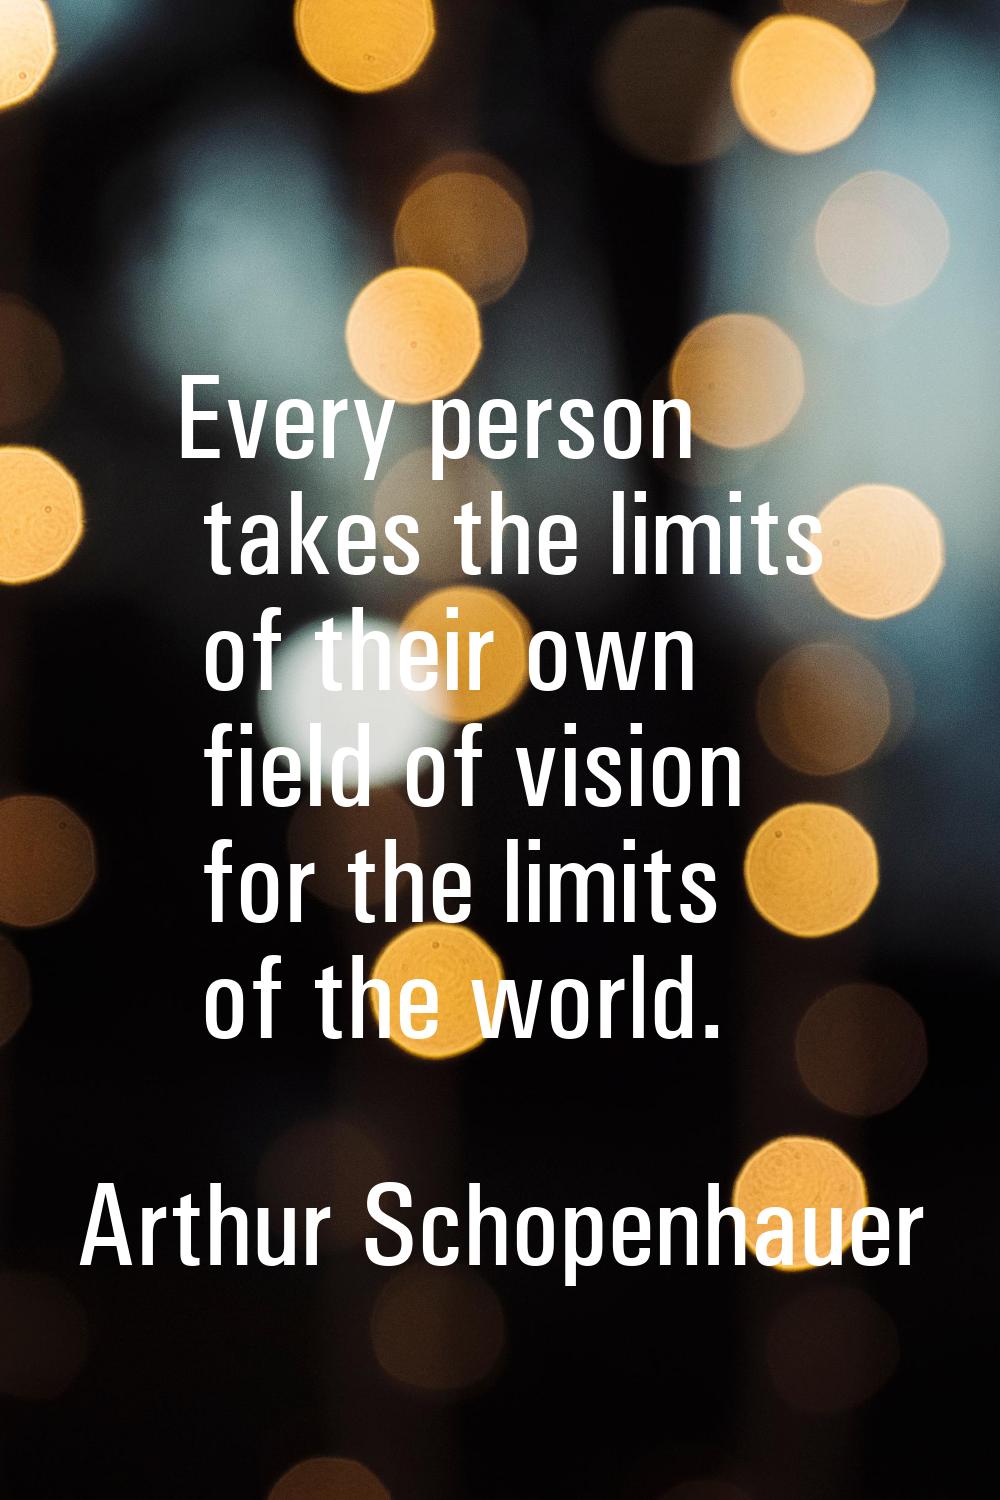 Every person takes the limits of their own field of vision for the limits of the world.